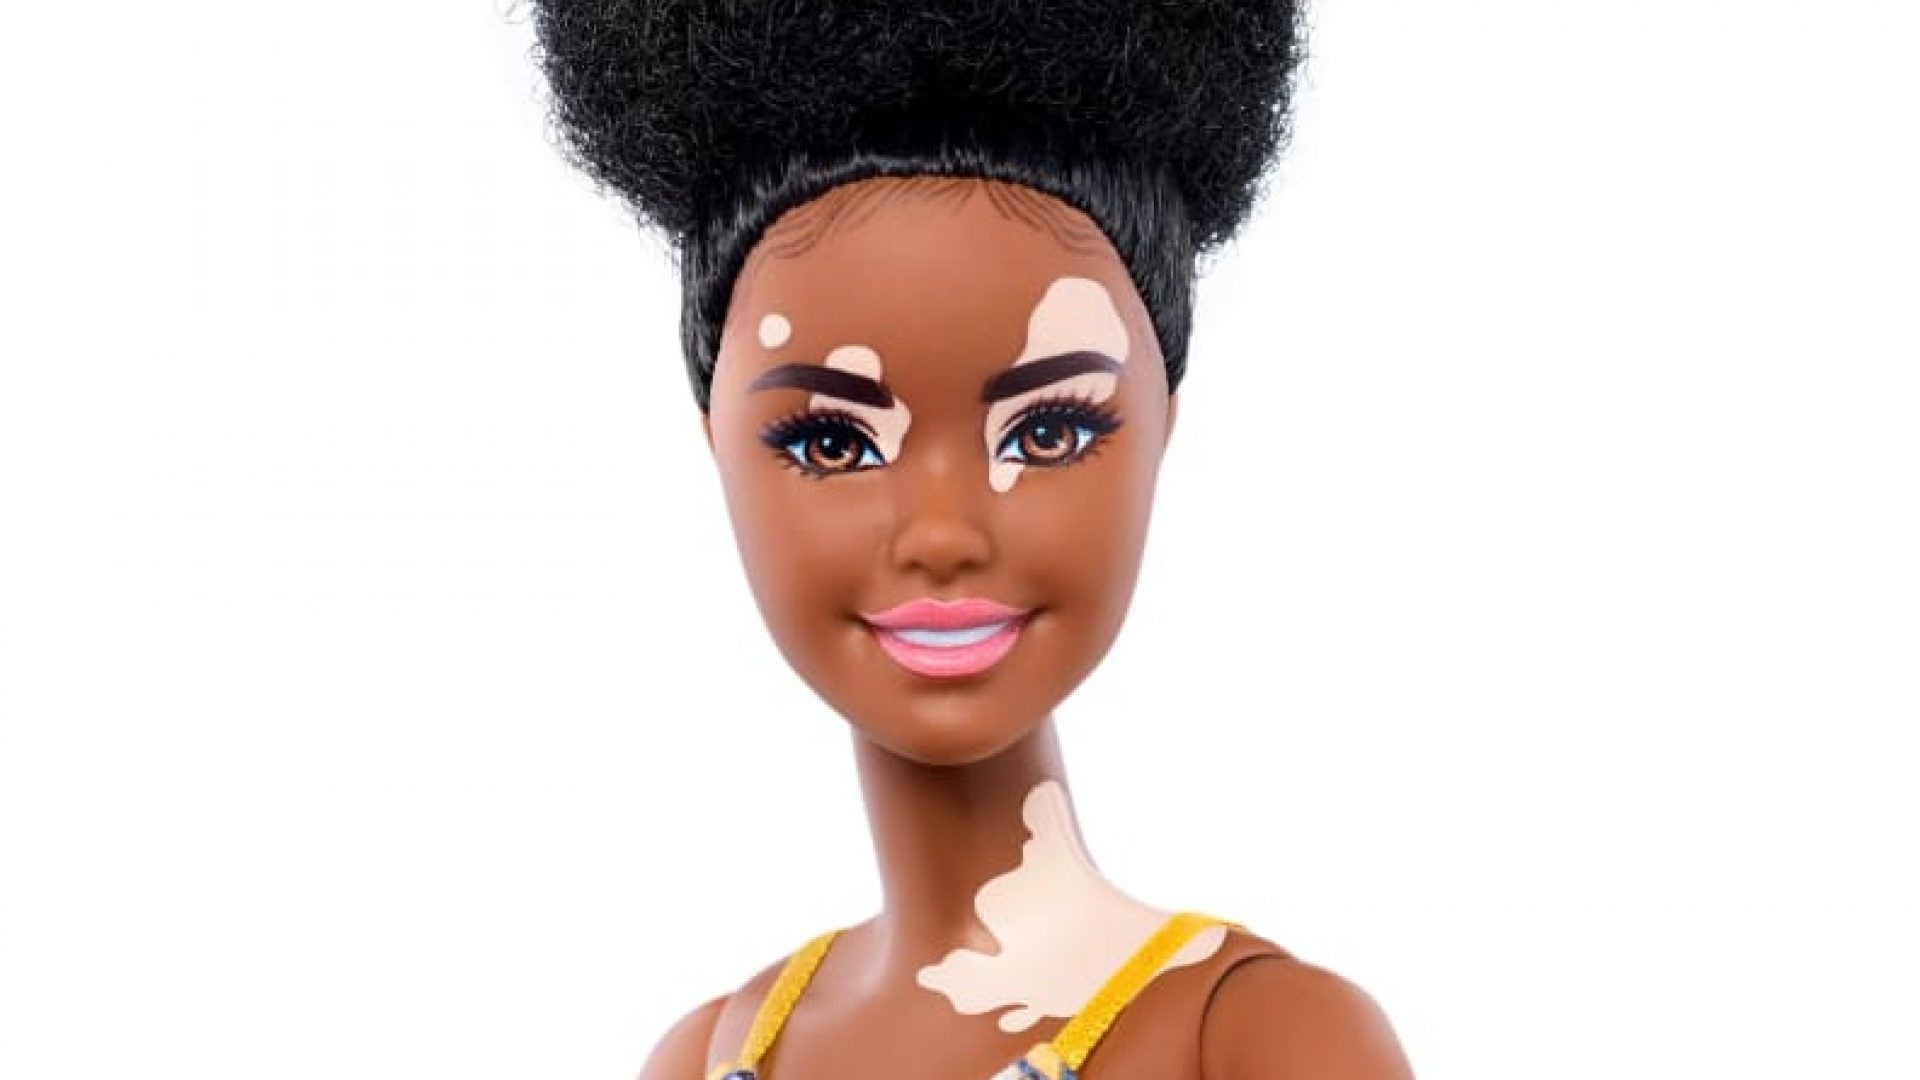 Barbie Locks Down Title Of Most Diverse Doll Line With New Melanin-Rich Offerings